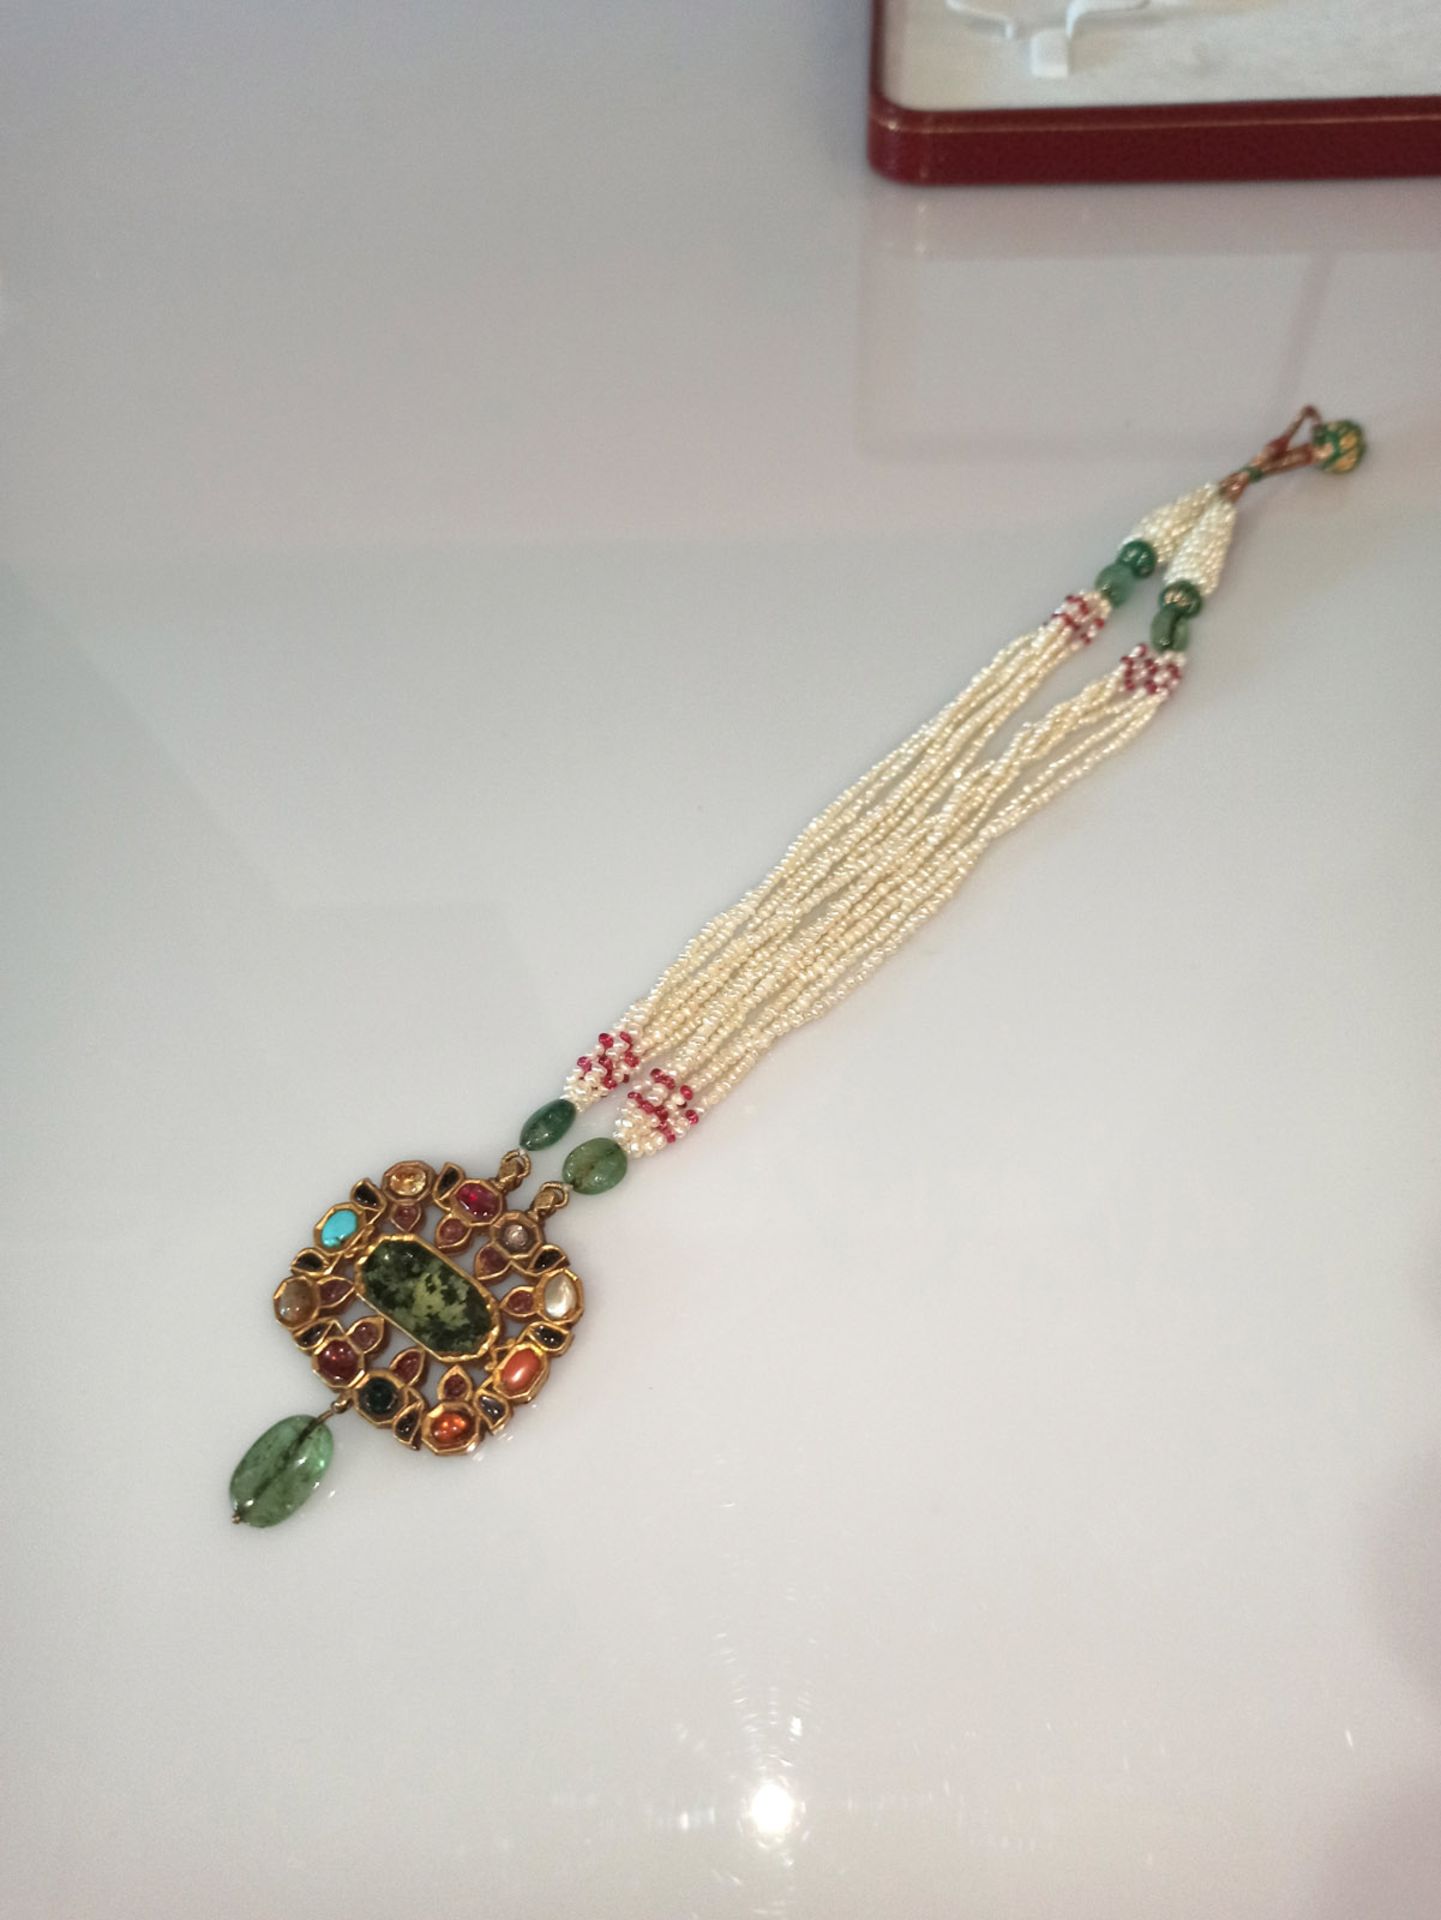 A PEARL NECKLACE WITH INLAID GOLD PENDANT IN MUGHAL STYLE - Image 3 of 5